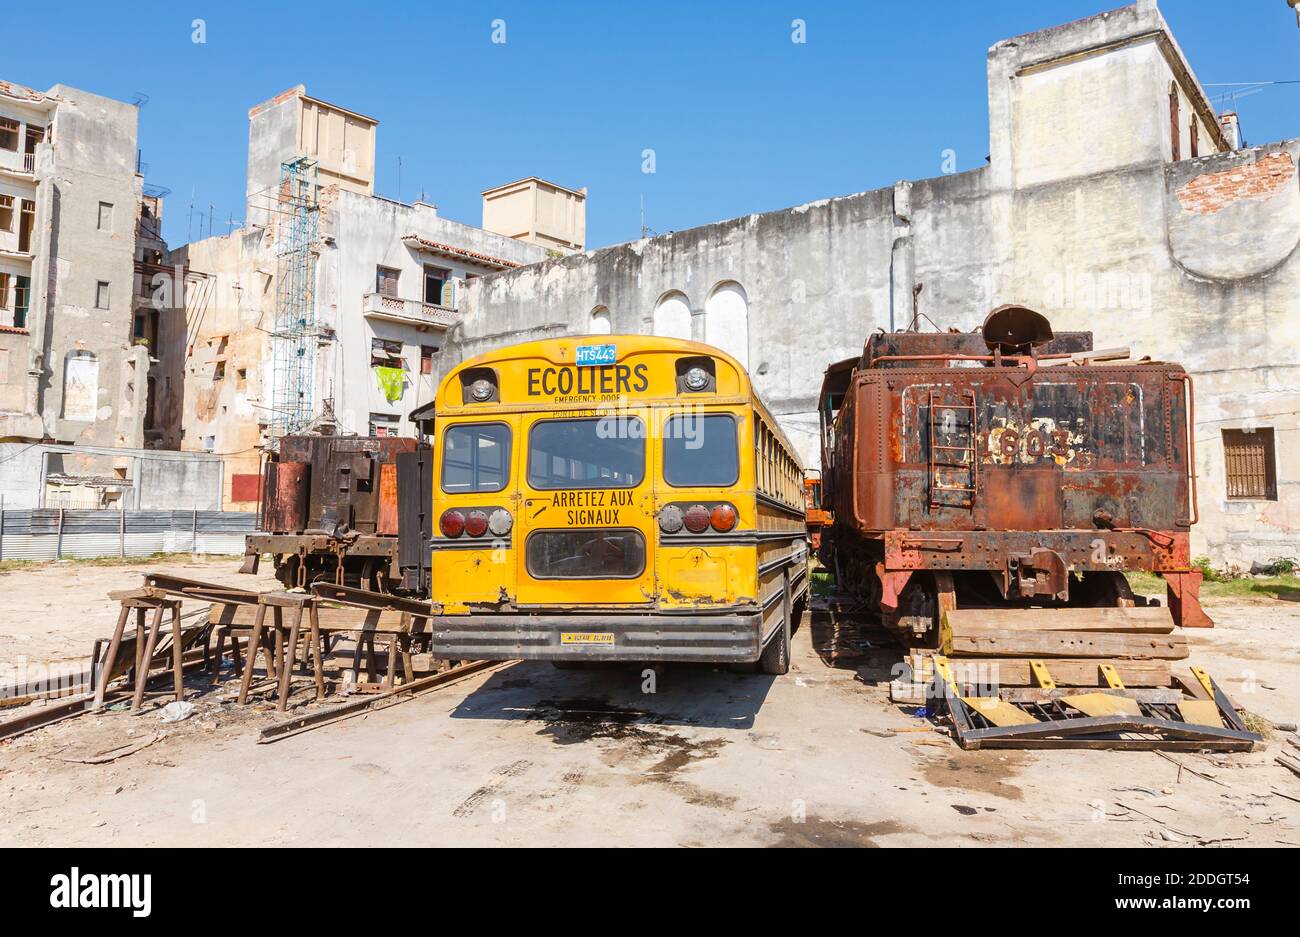 A typical vintage yellow Blue Bird school bus parked in a railway scrapyard in downtown Old Havana, Capital city of Cuba Stock Photo